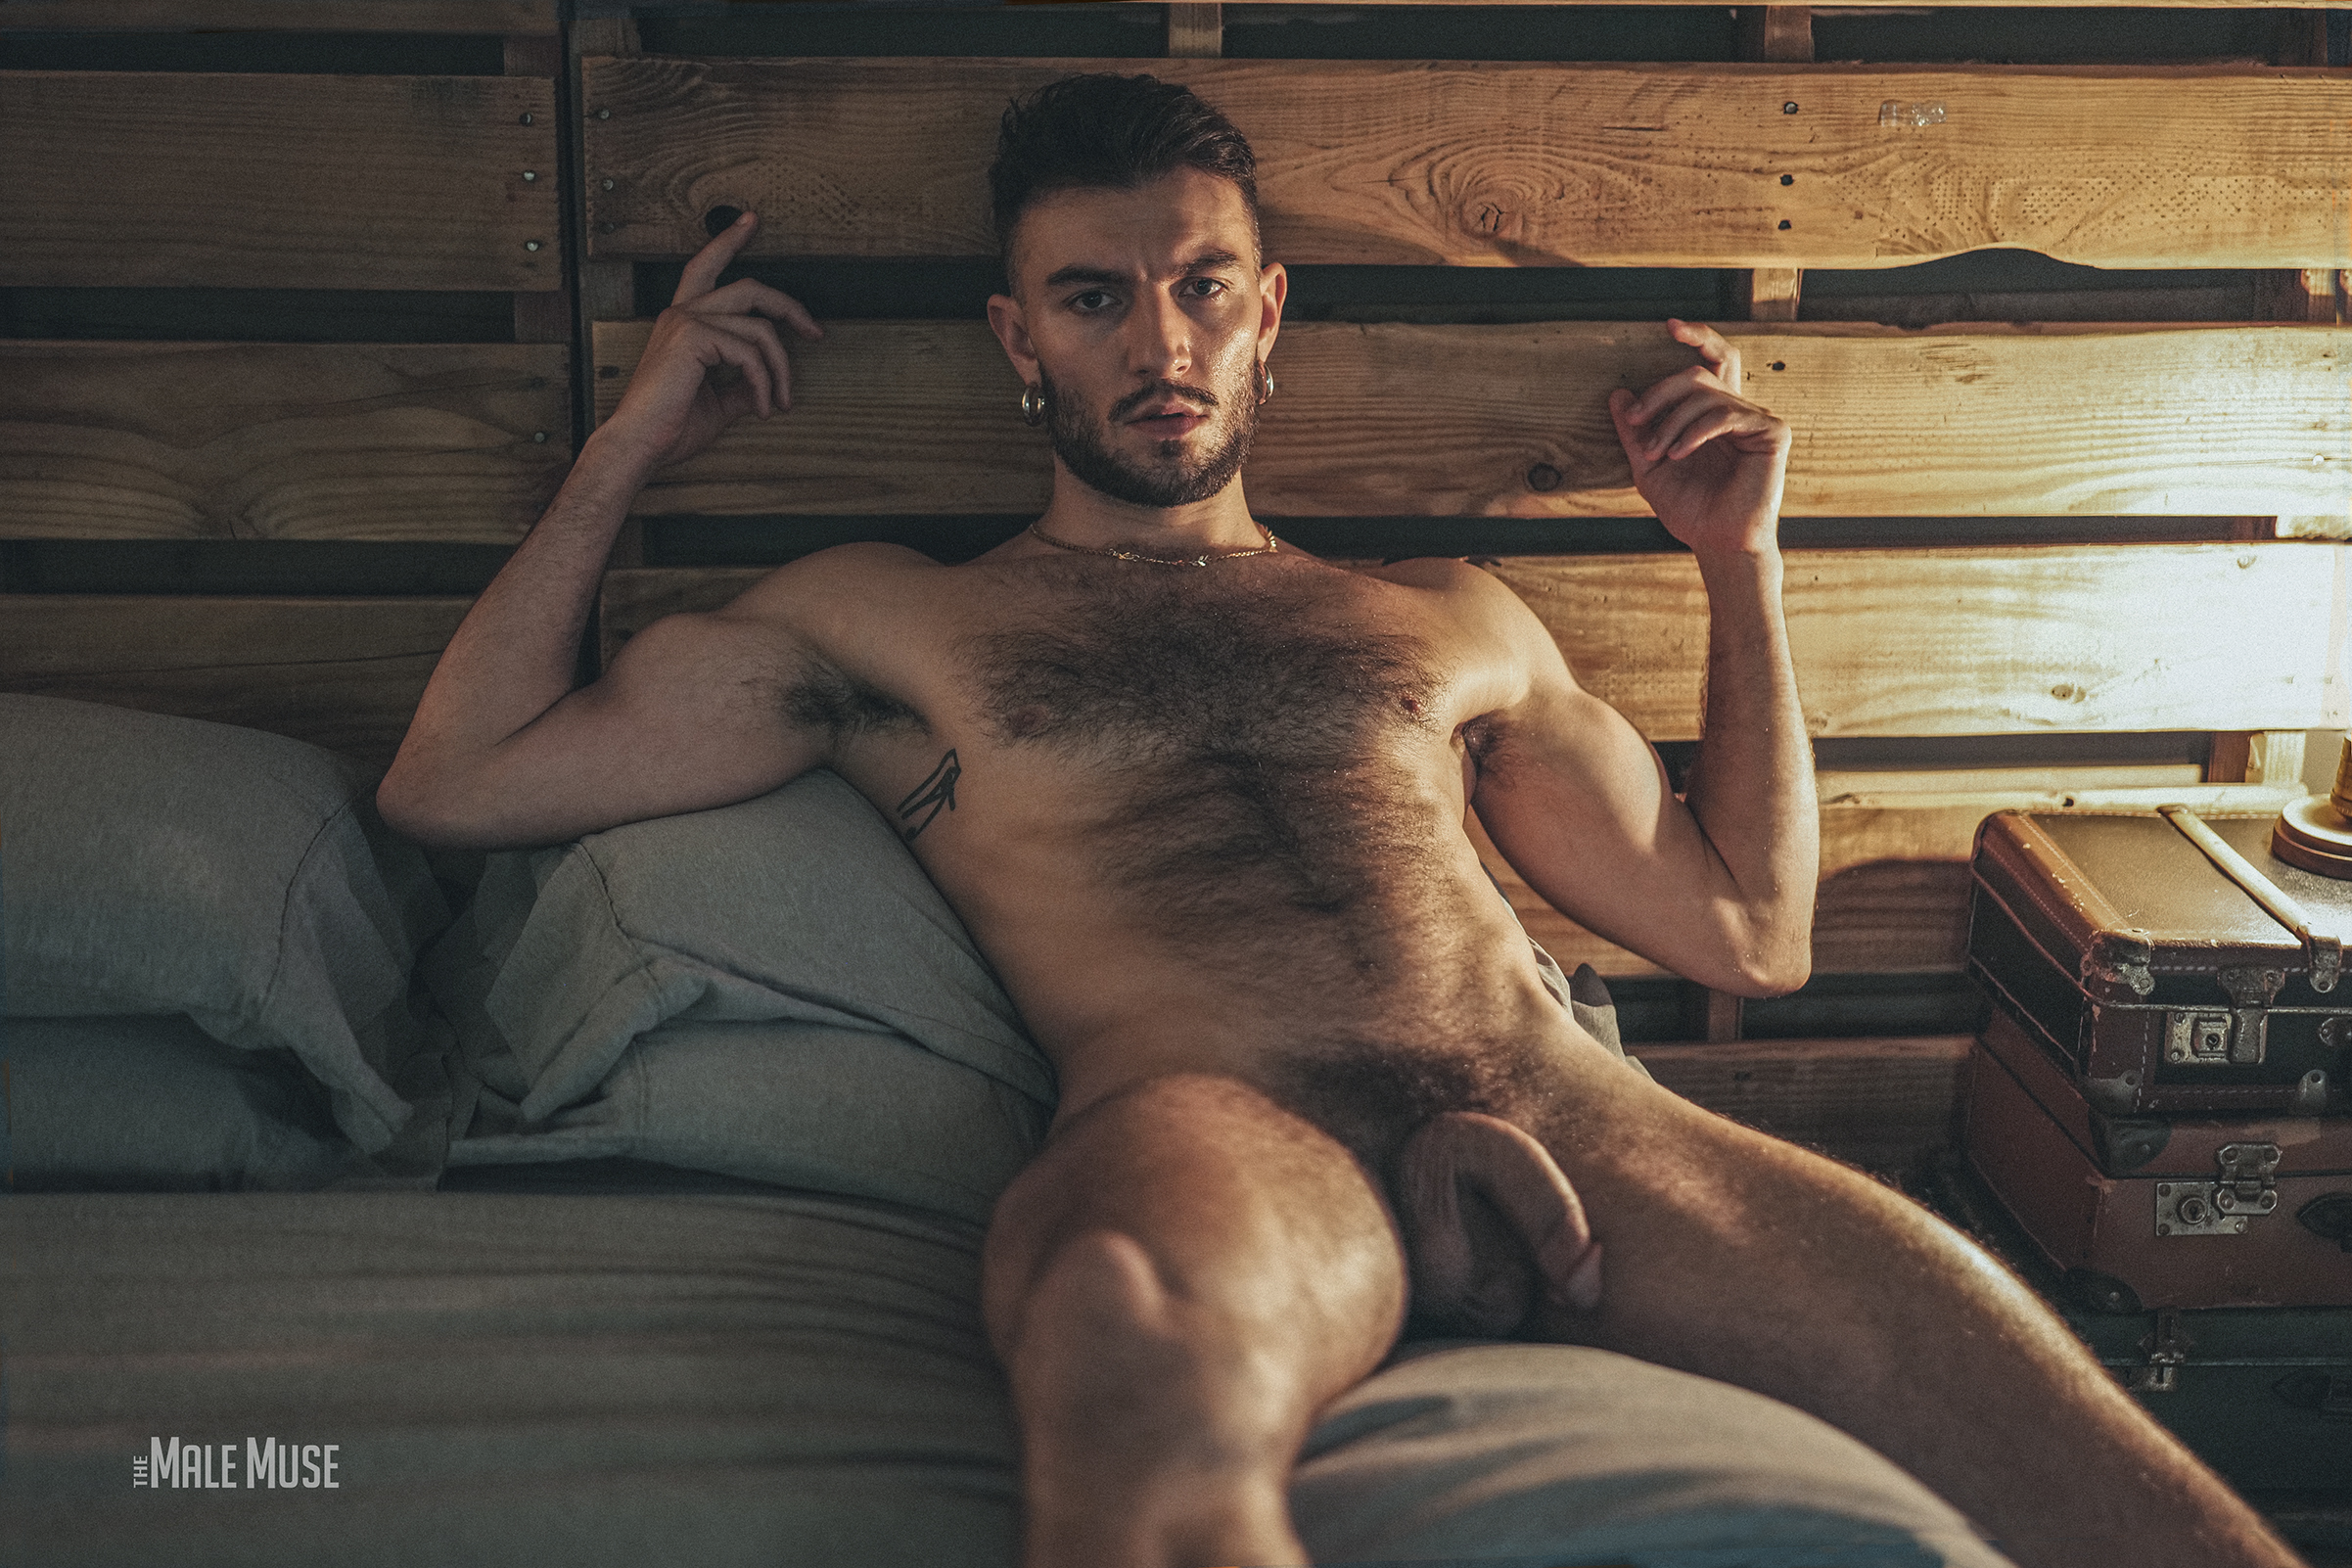 Hairy Hung Stud Spreads Out in Sexy Zine Layout | Daily Dudes @ Dude Dump